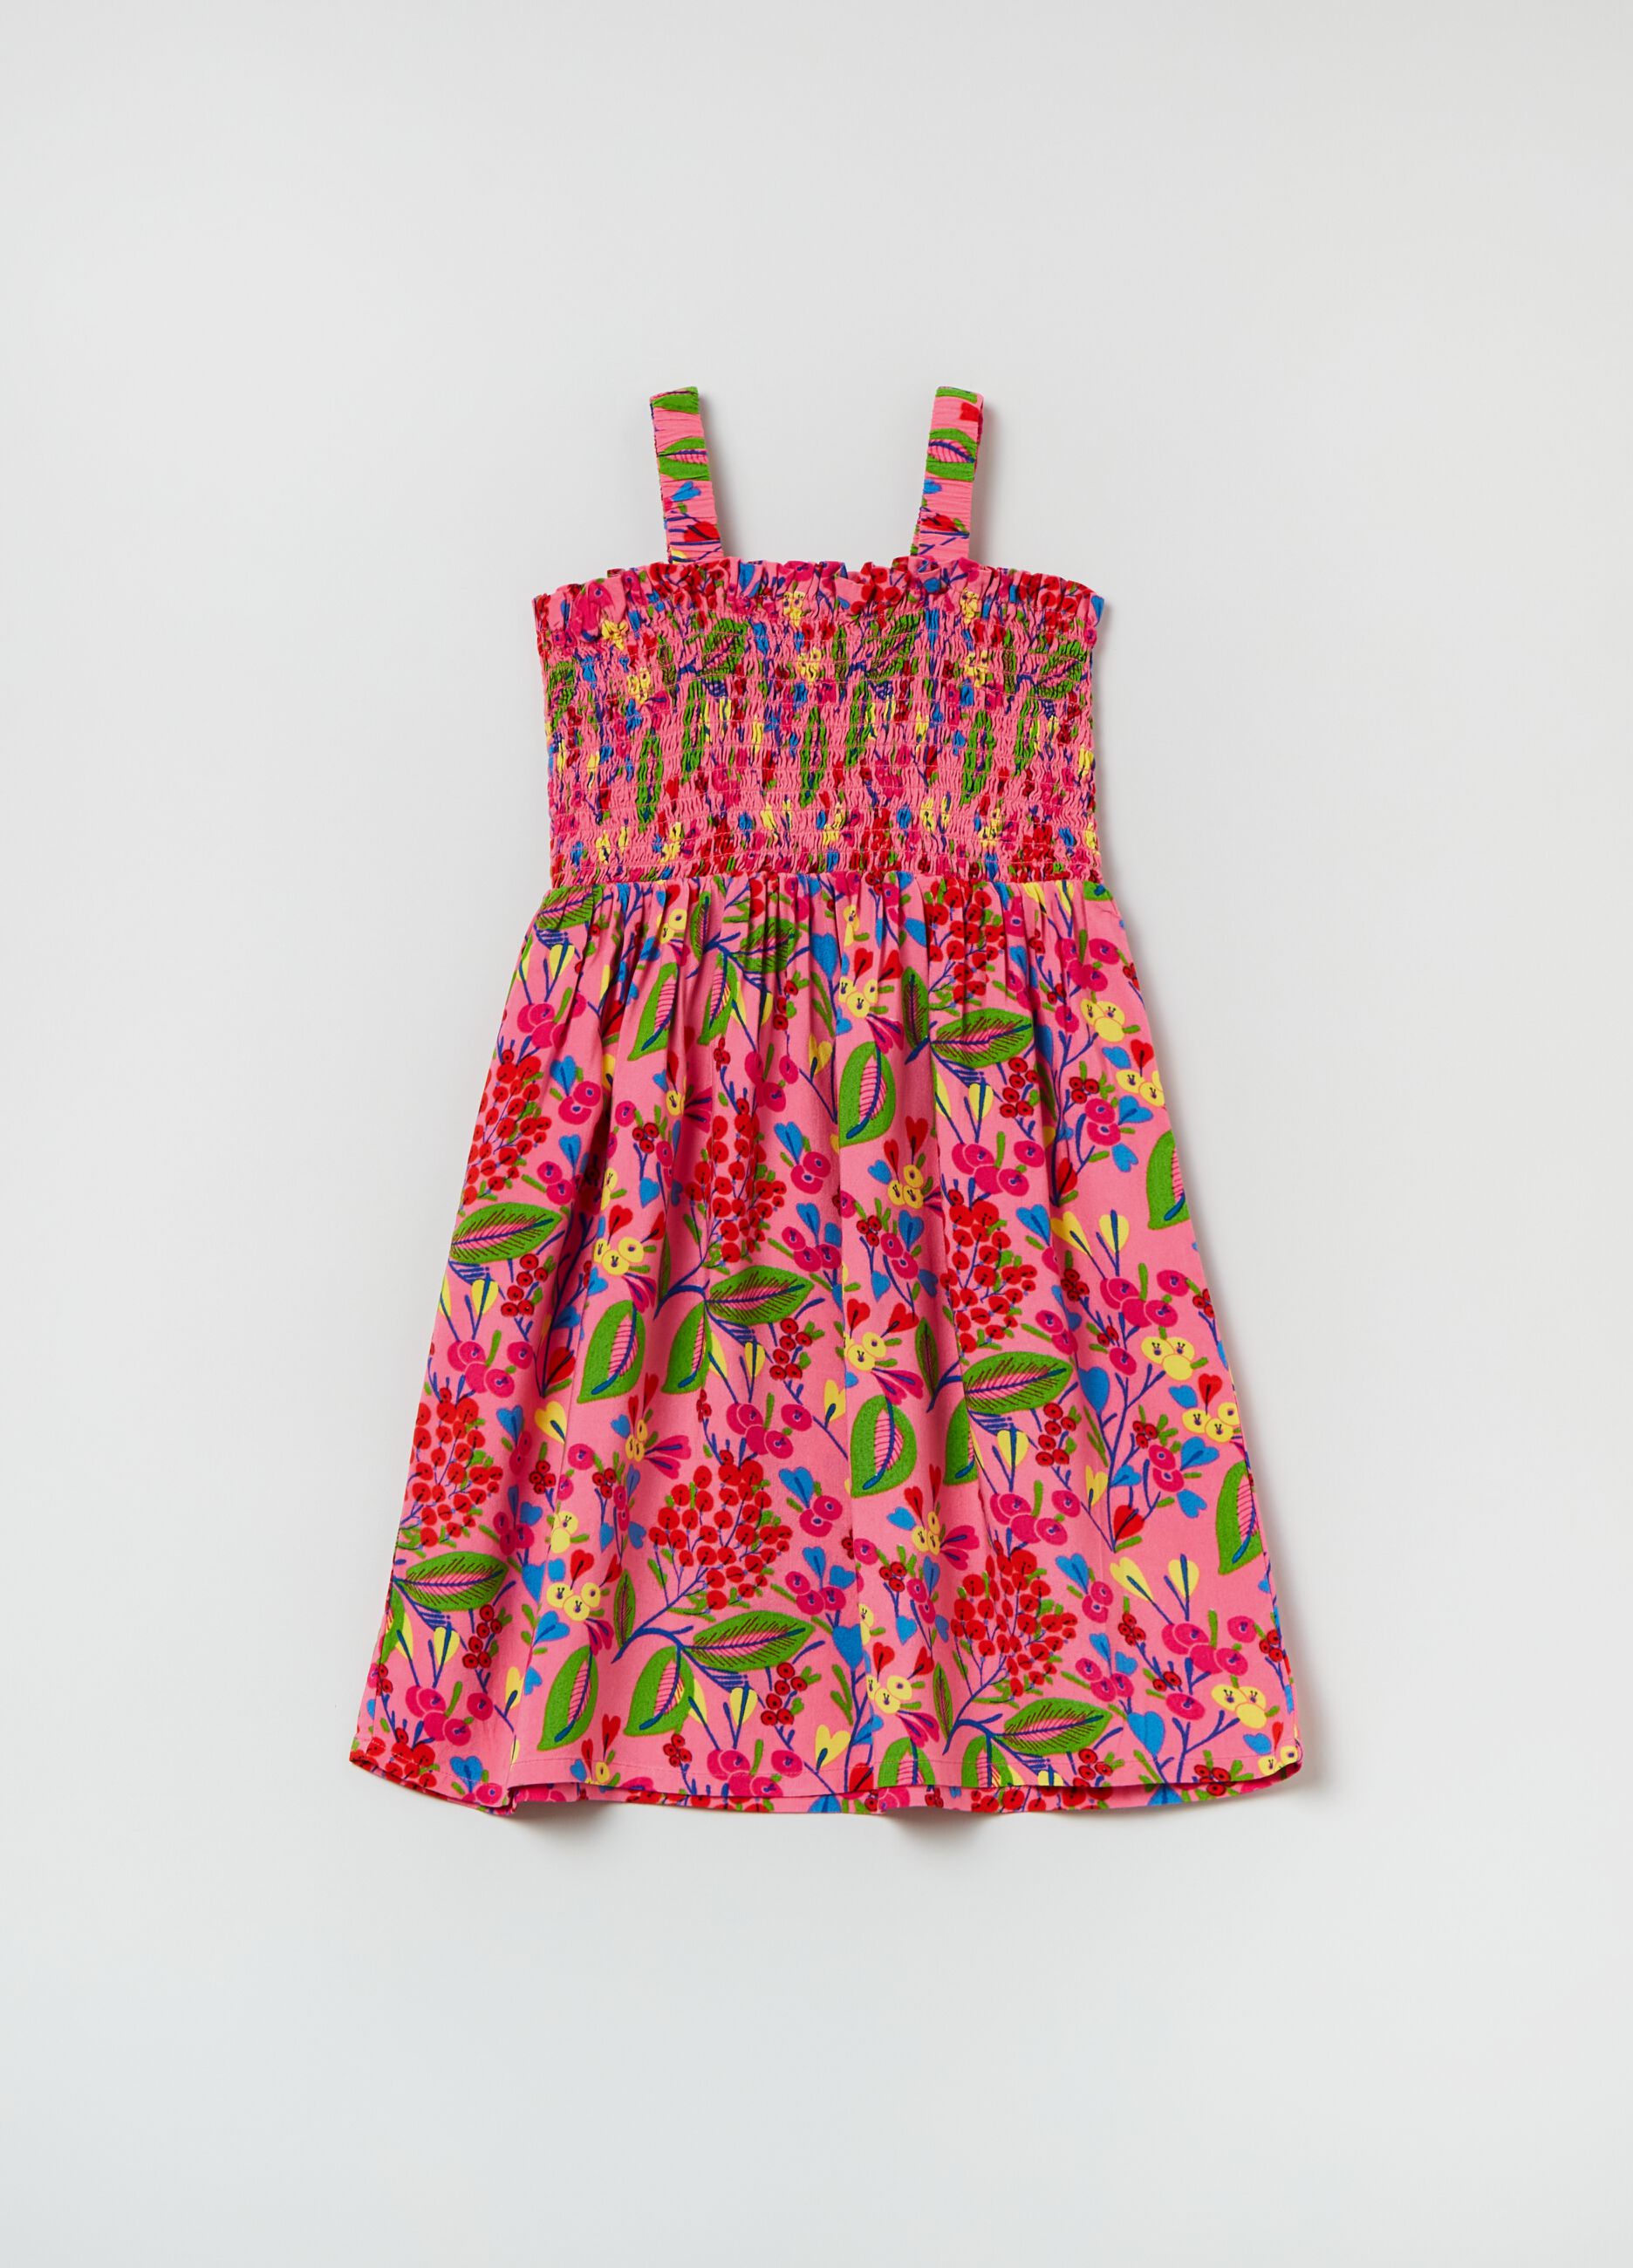 Viscose dress with floral print